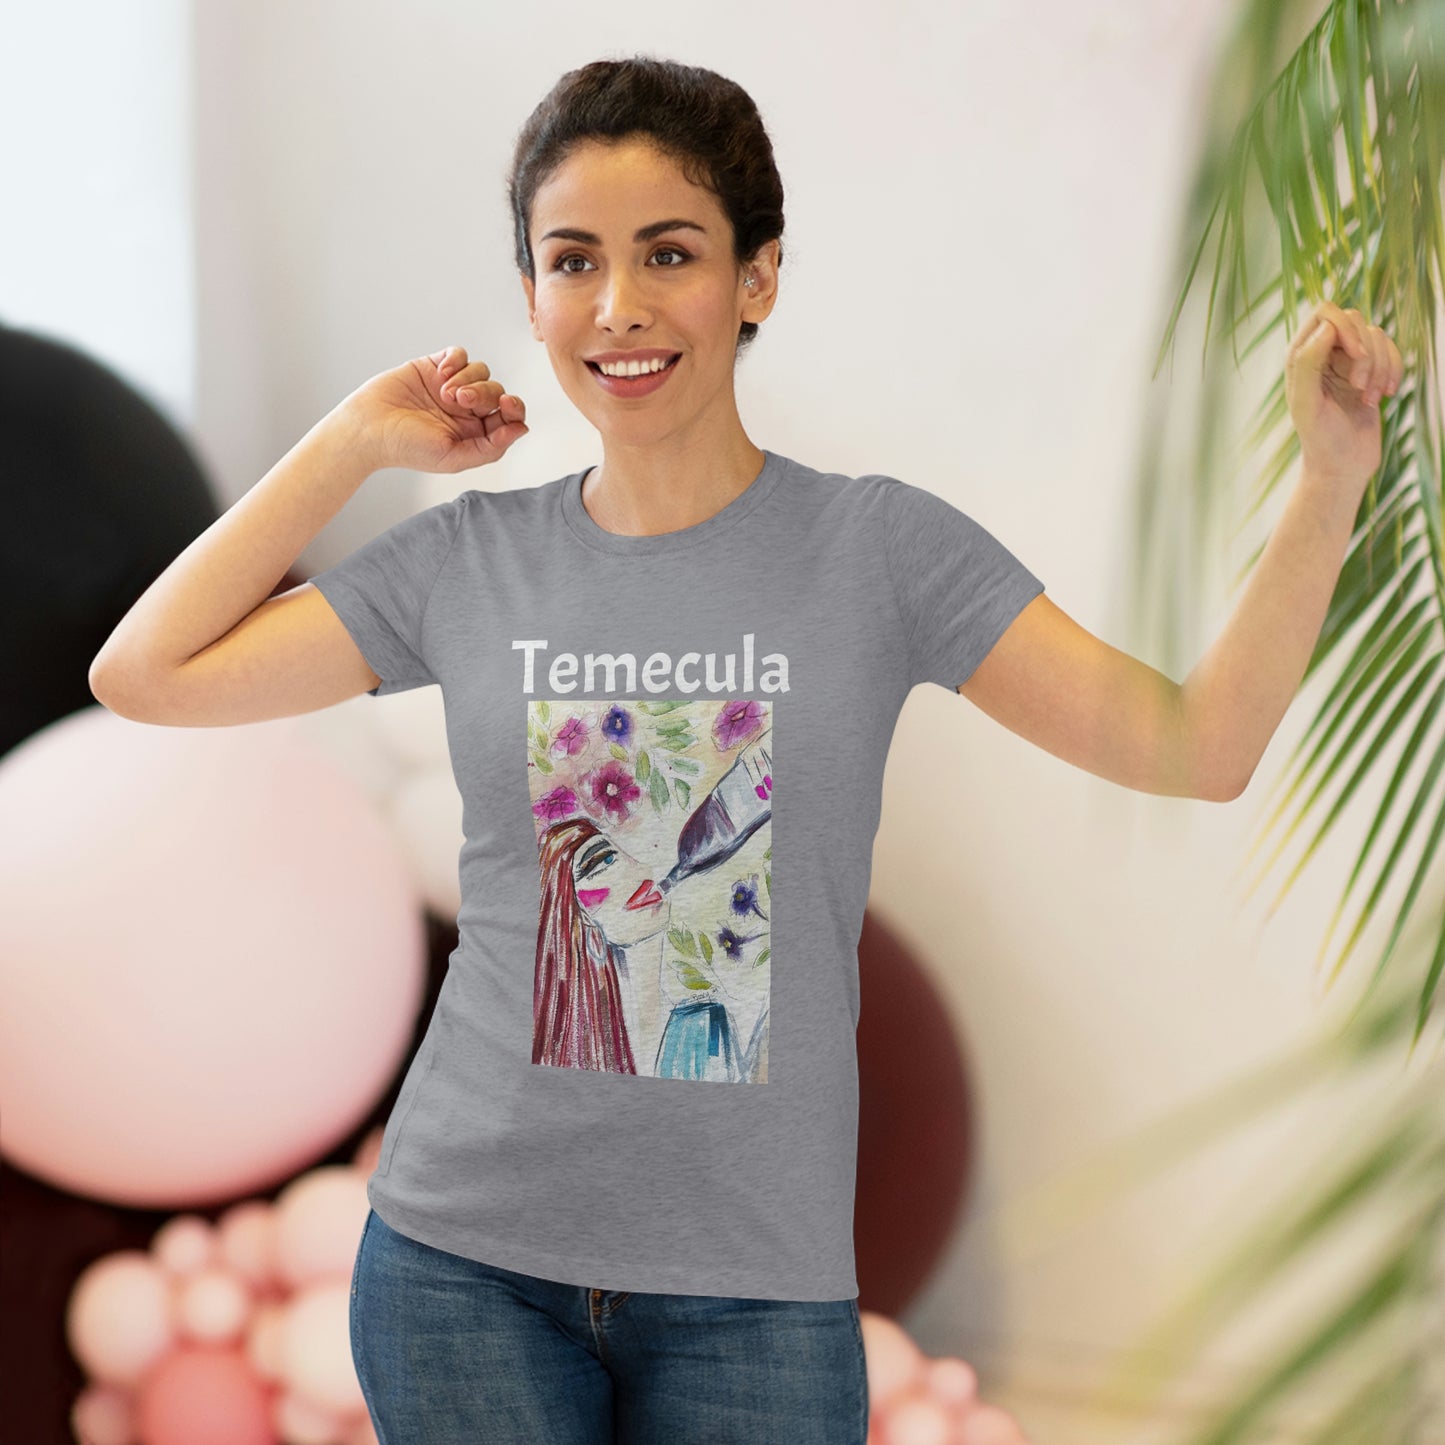 Temecula Women's fitted Triblend Tee Temecula tee shirt souvenir featuring "That kind of Day" painting